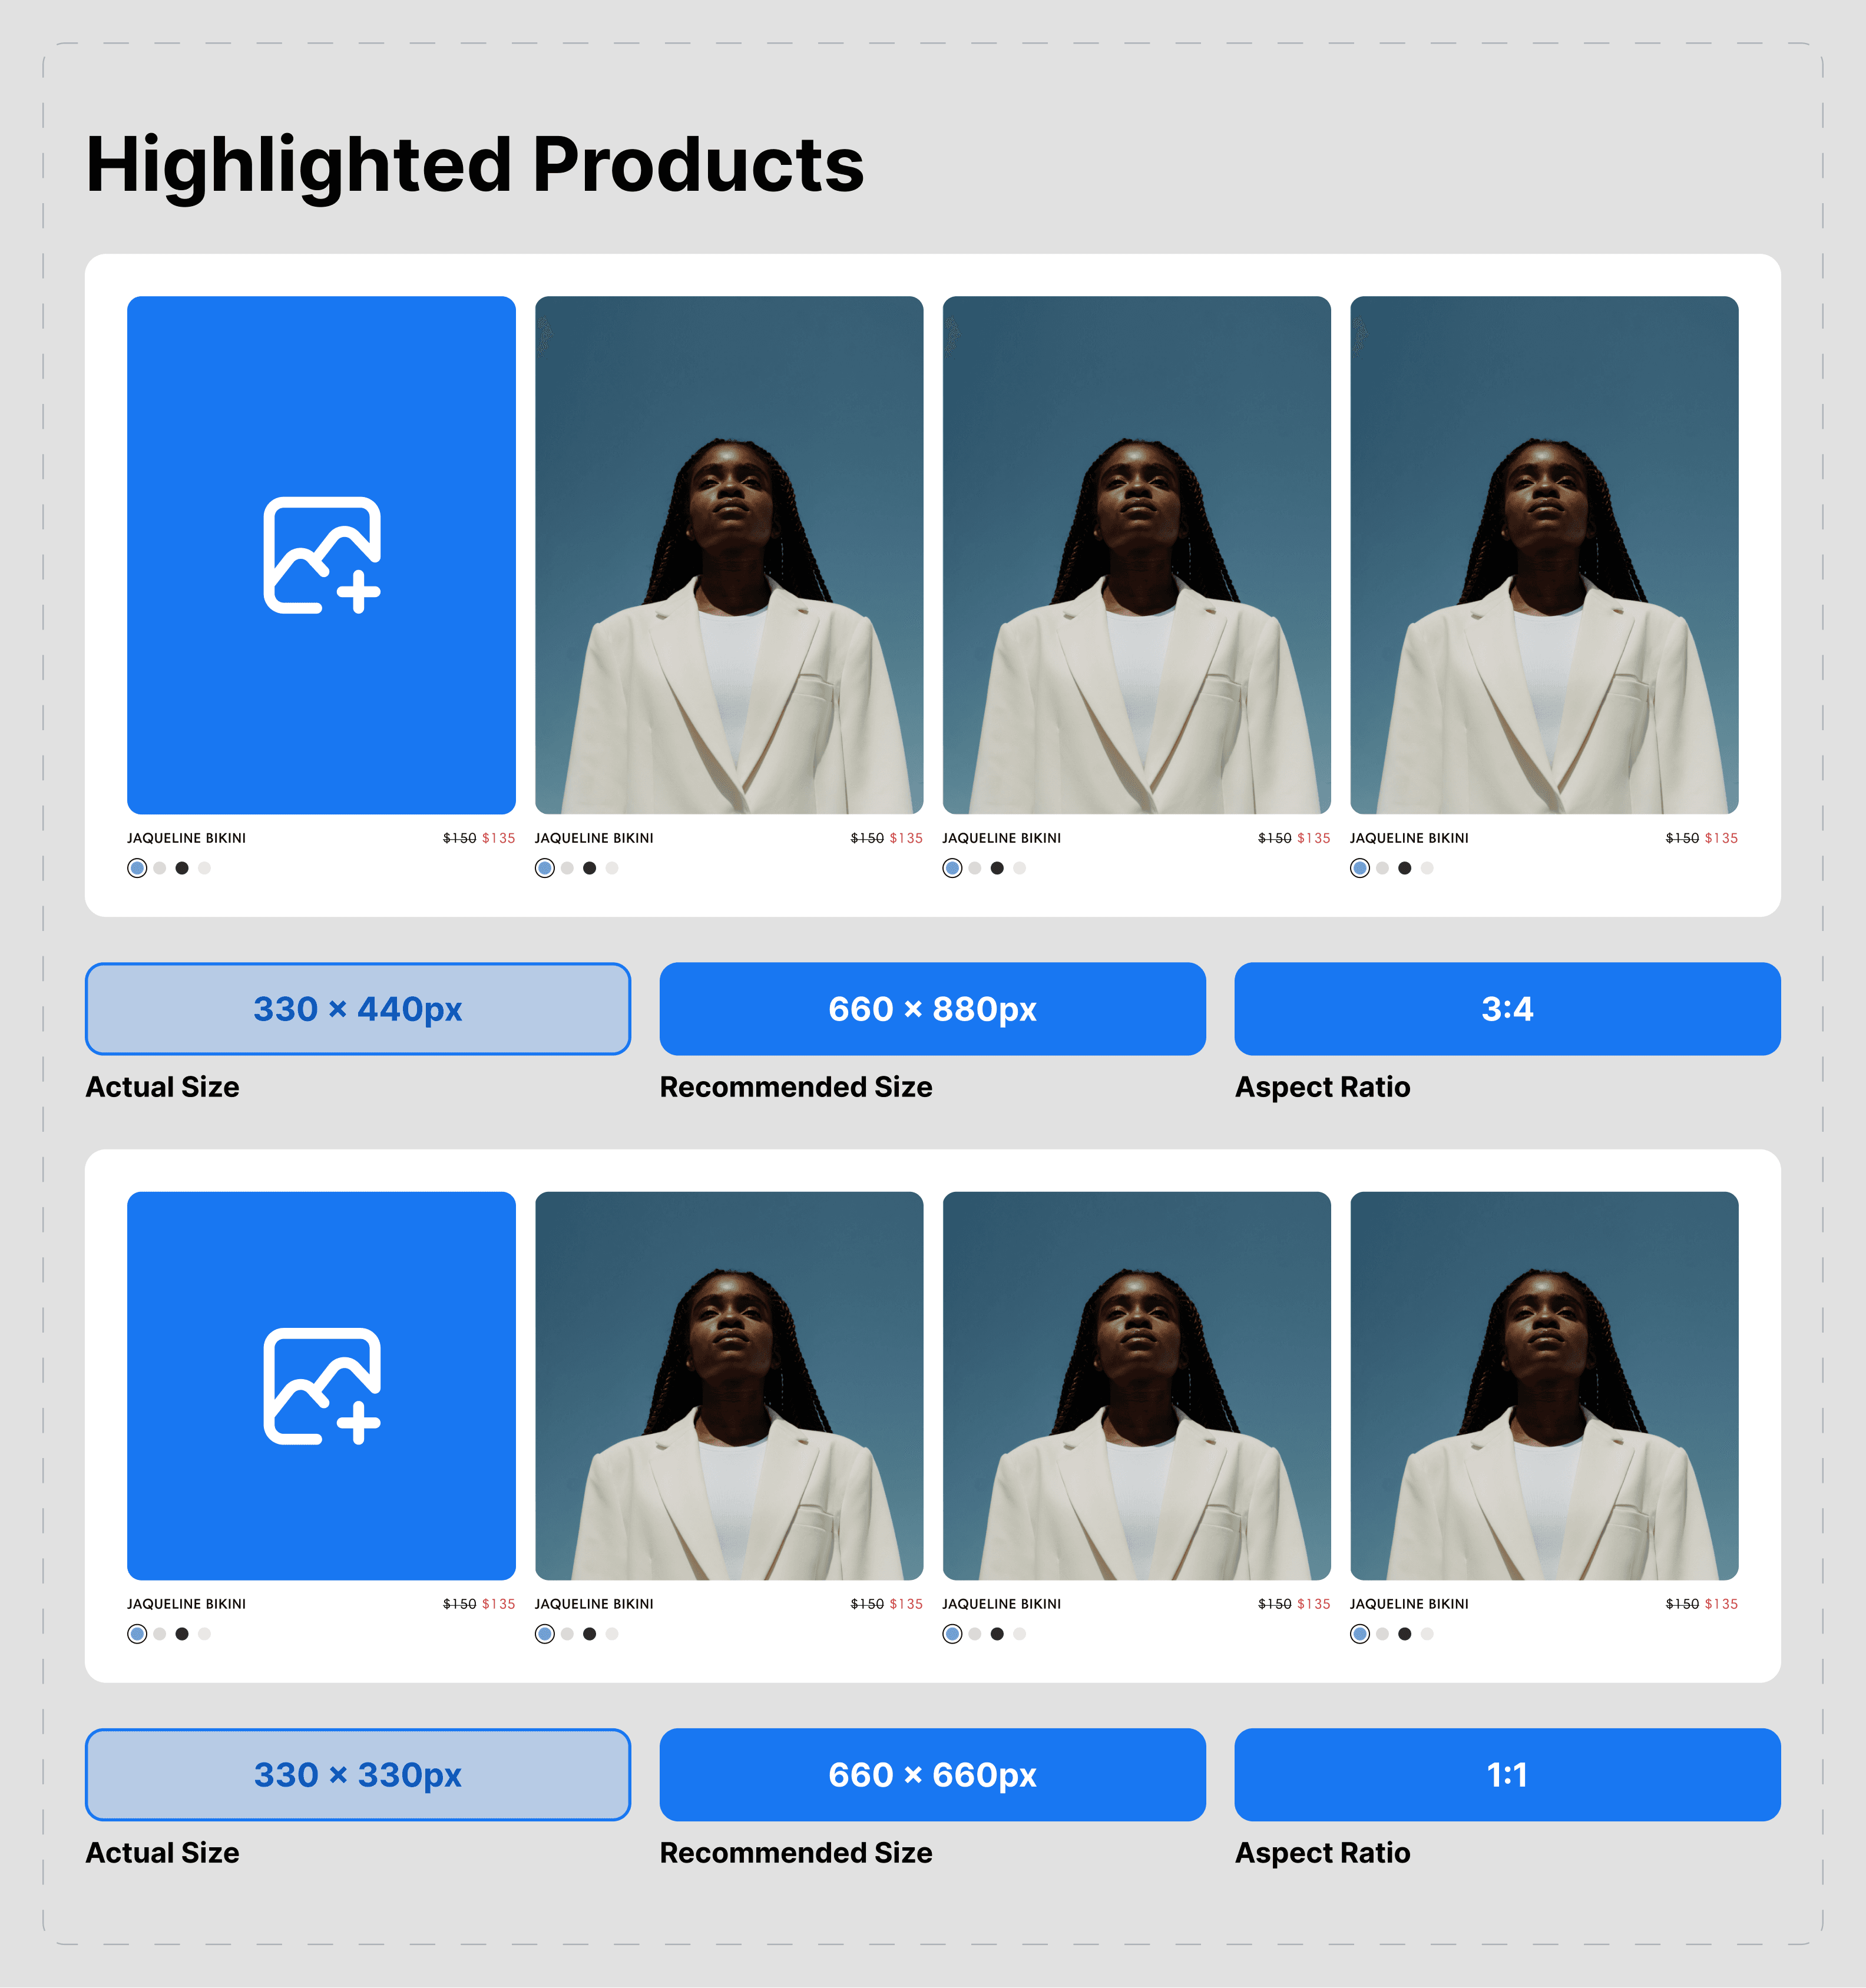 featured_products_1.png